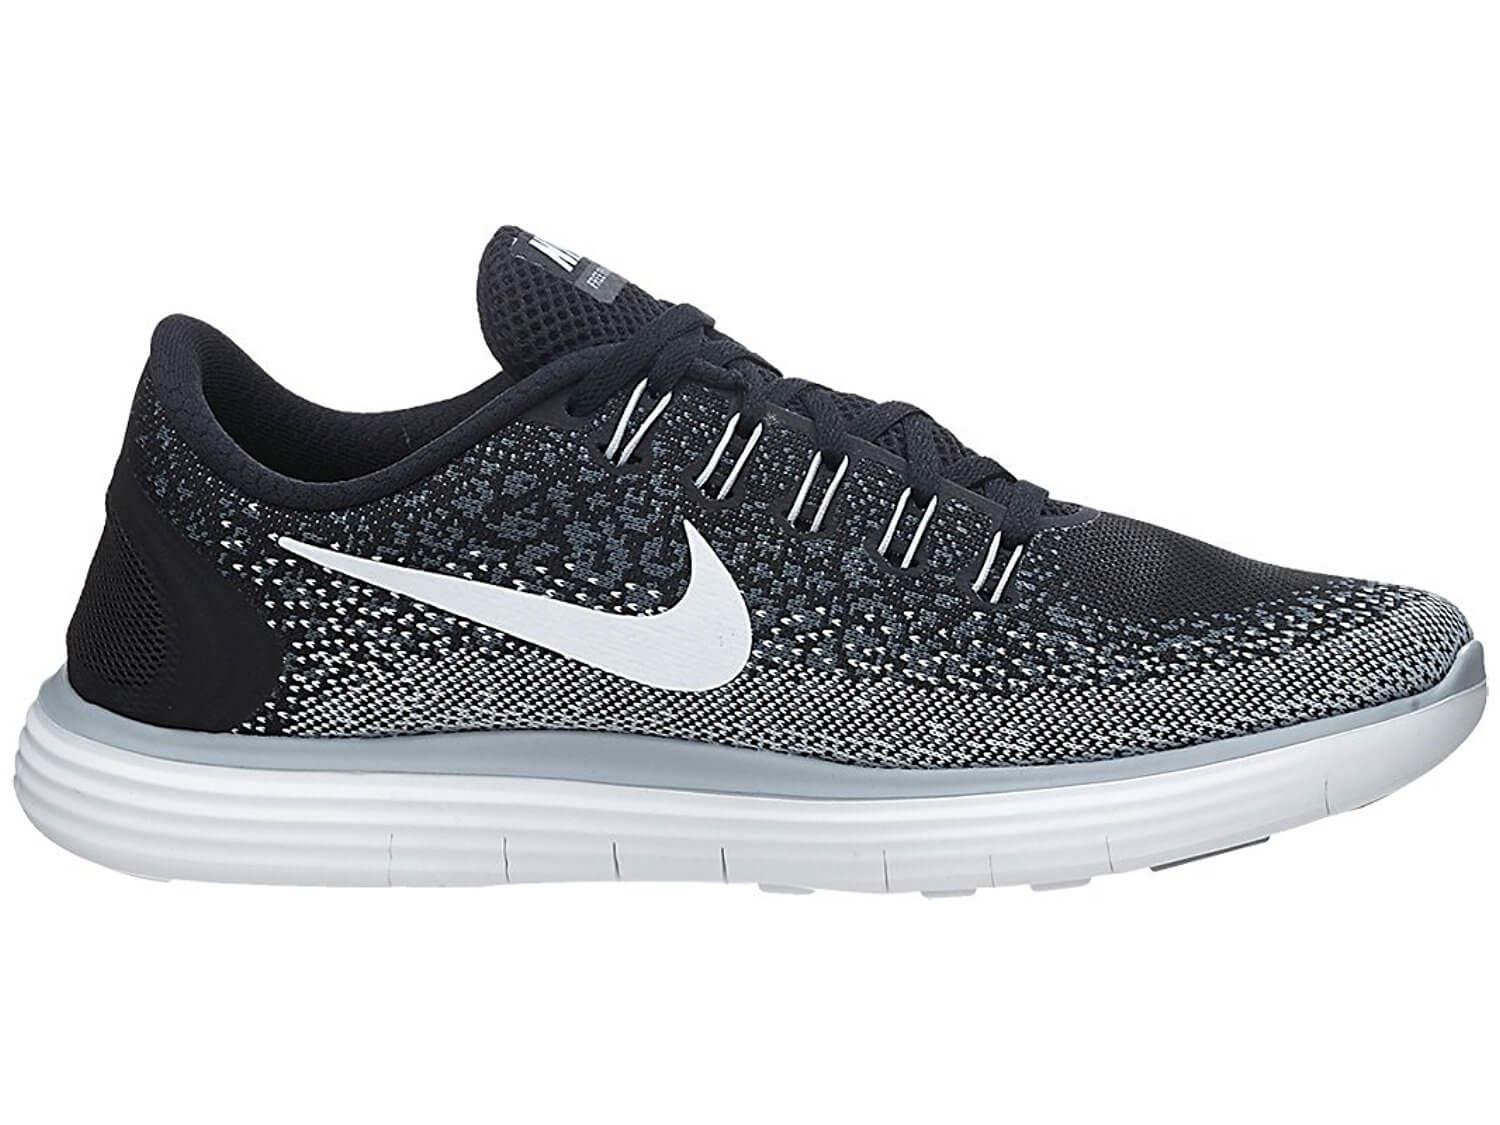 Responsiveness and cushioning go hand-in-hand with the Nike Free RN Distance's midsole.